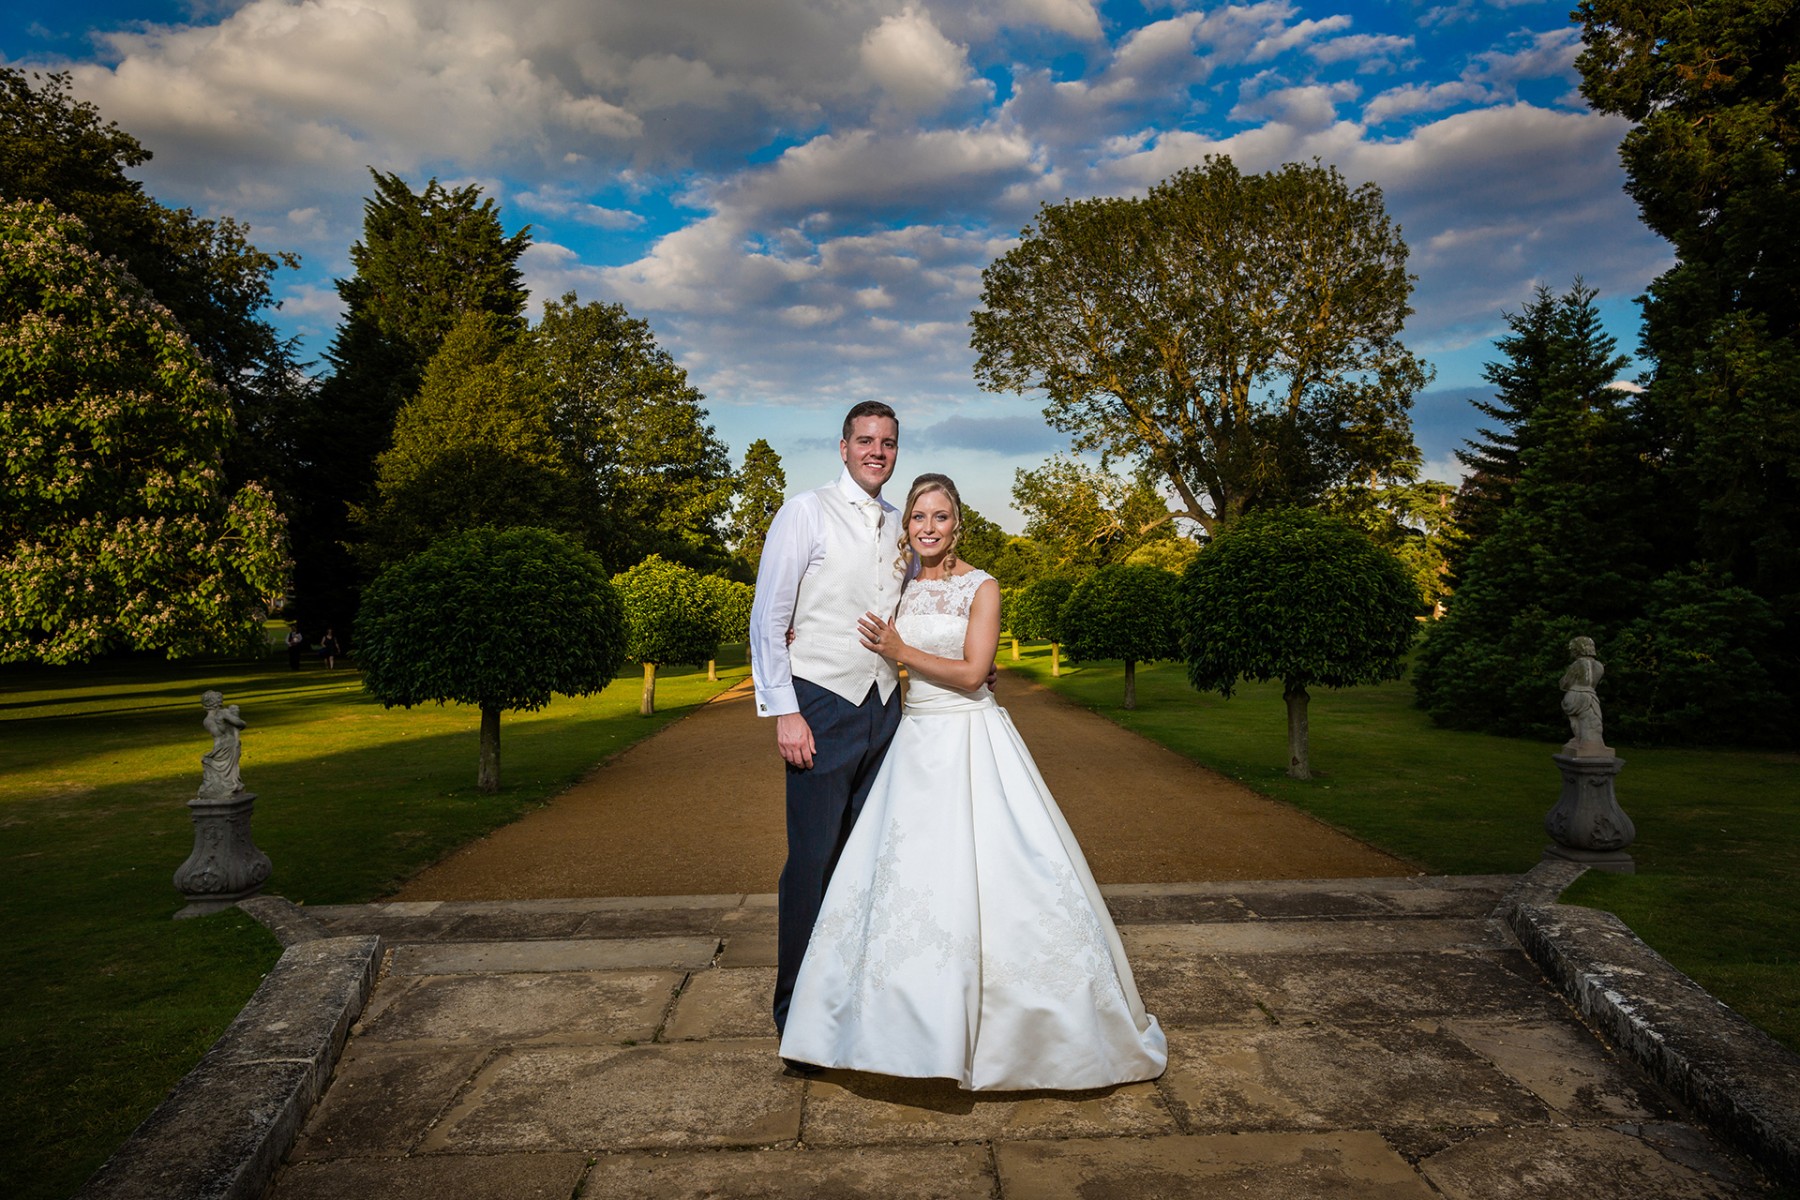 Summer Weddings at Wrest Park | Jess and Jamie